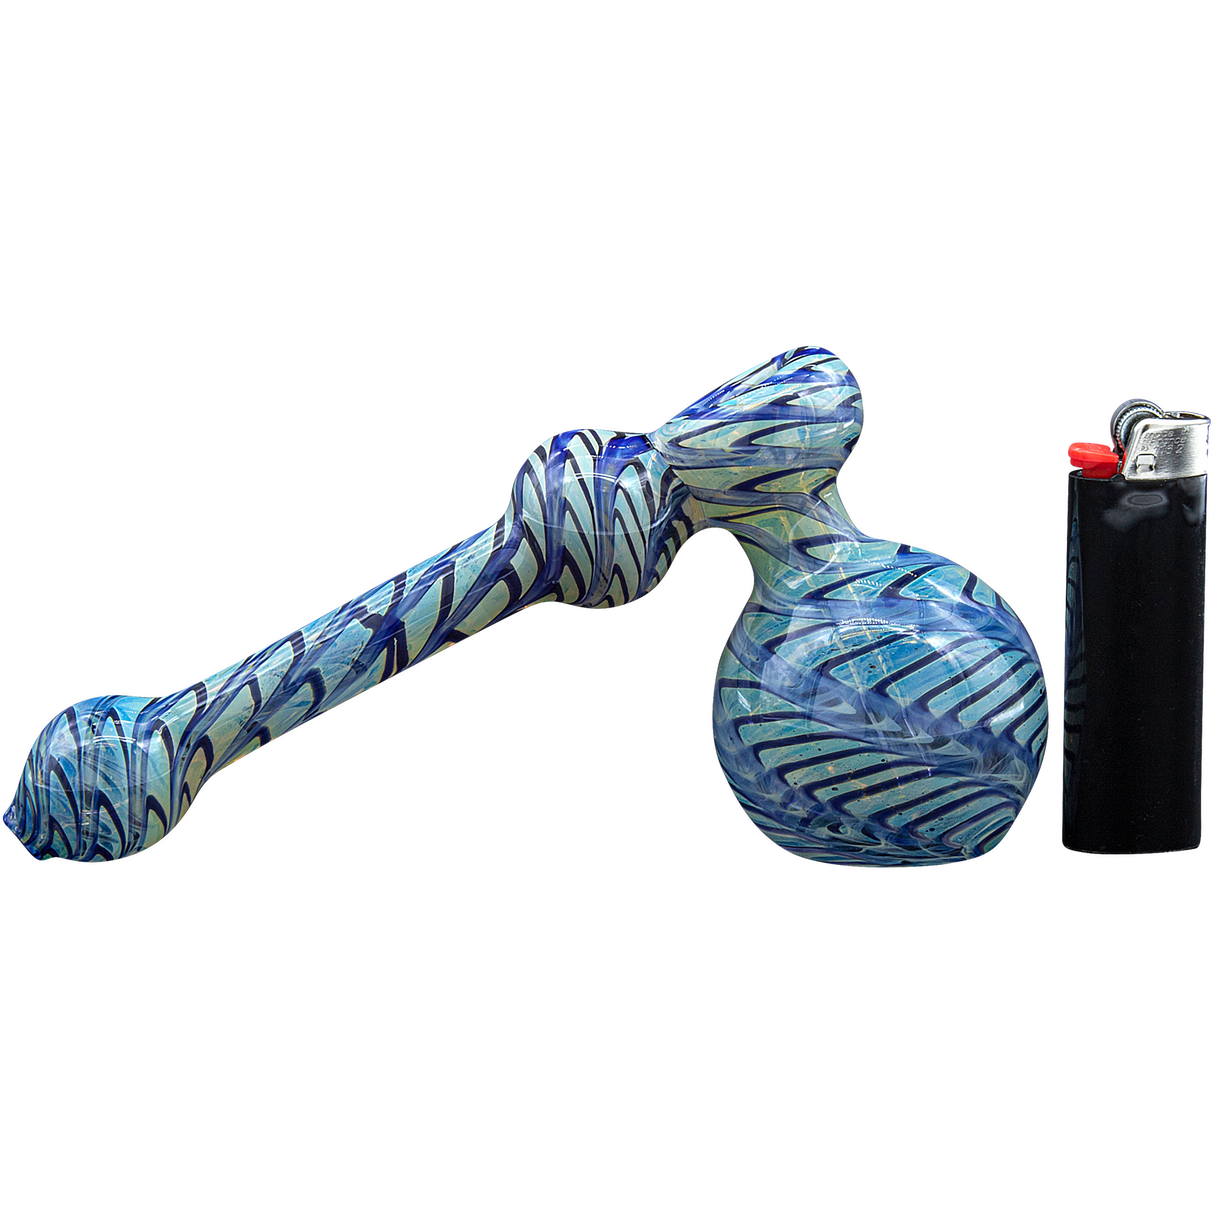 LA Pipes "Full Rake" Fumed Hammer Bubbler Pipe in Blue, Side View with Lighter for Scale